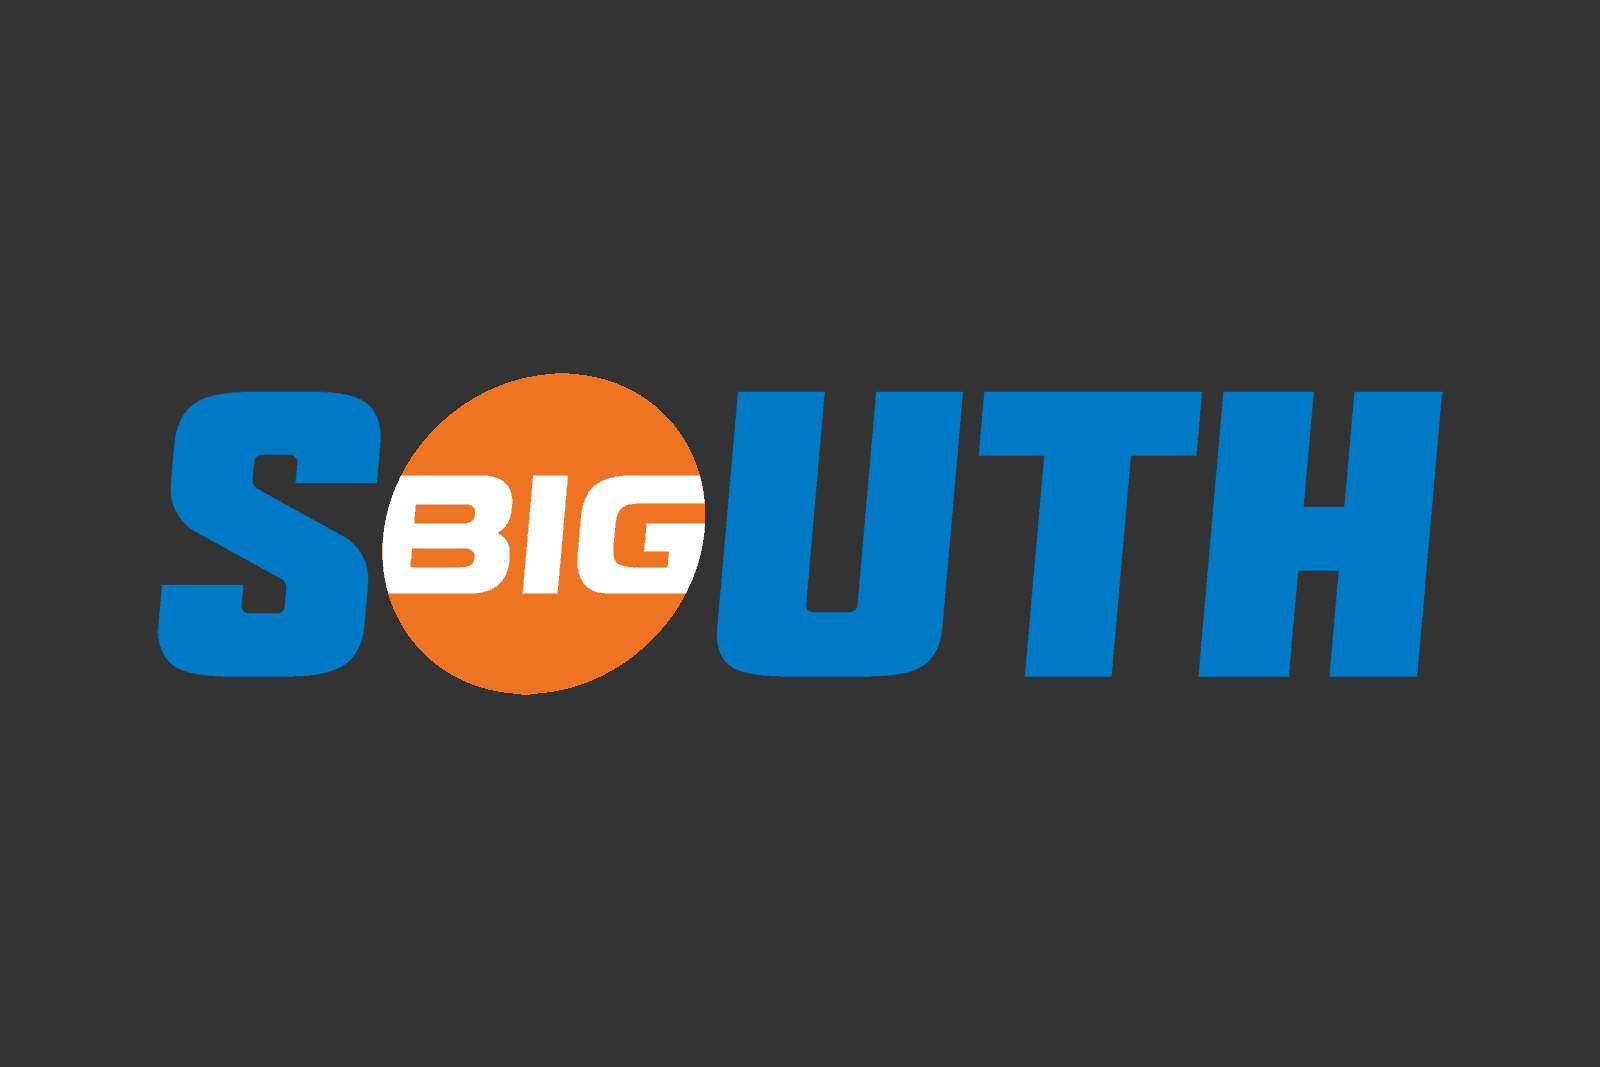 Big South Conference